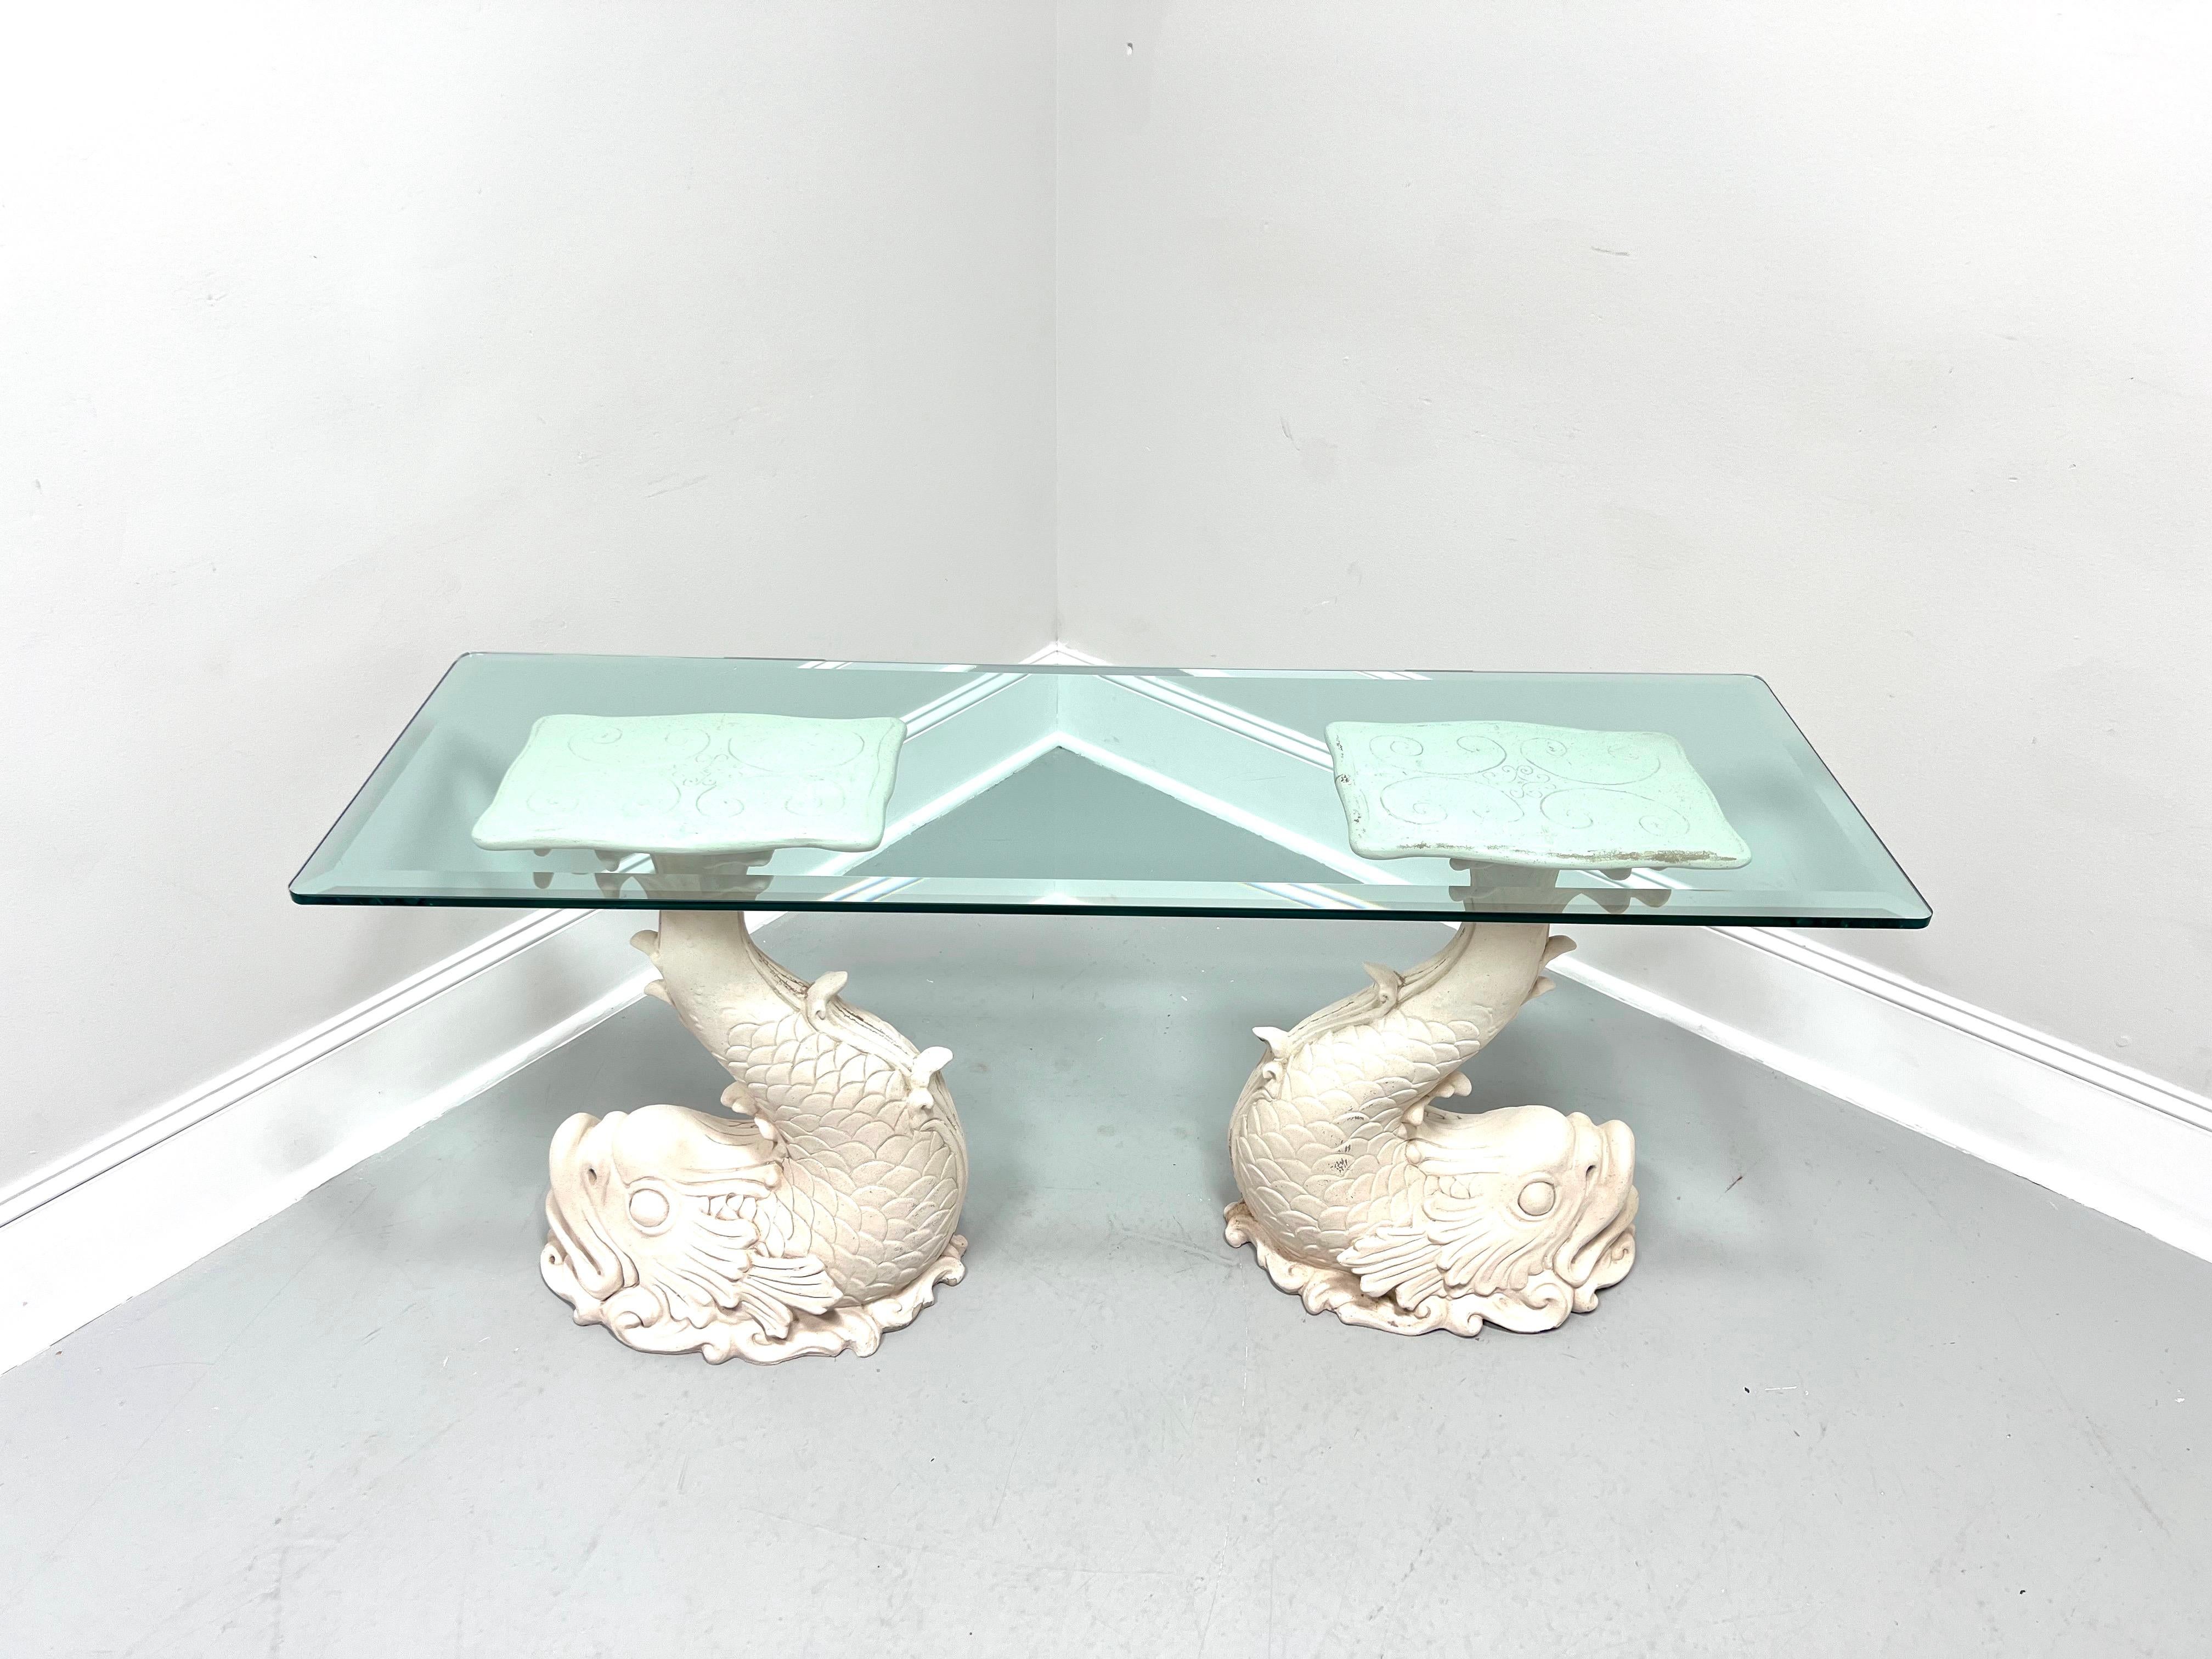 A Coastal / Tropical style glass top console table, unbranded. Two formed resin, or possibly fiberglass, bases painted a beige / off white color in the shape of mythical dolphins with their tails making a flat surface with a decorative design to